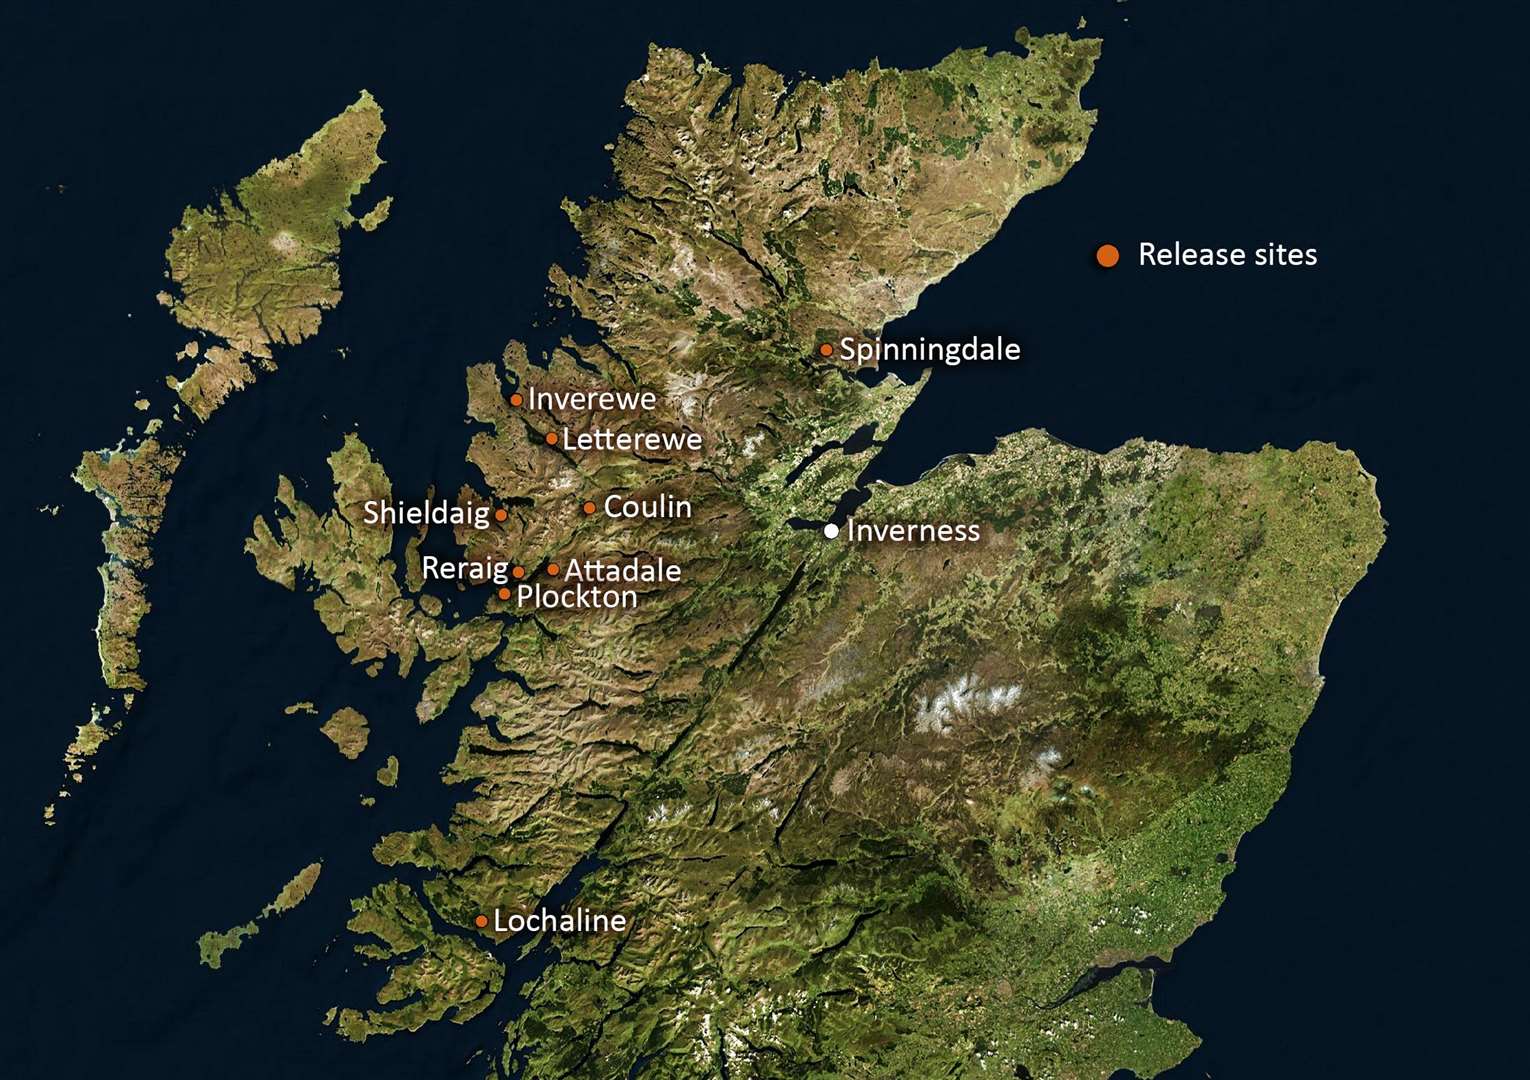 The locations where Trees for Life has reintroduced red squirrel populations range from Sutherland in the north across to several Wester Ross locations in the west and the Morvern peninsula in Lochaber to the south.